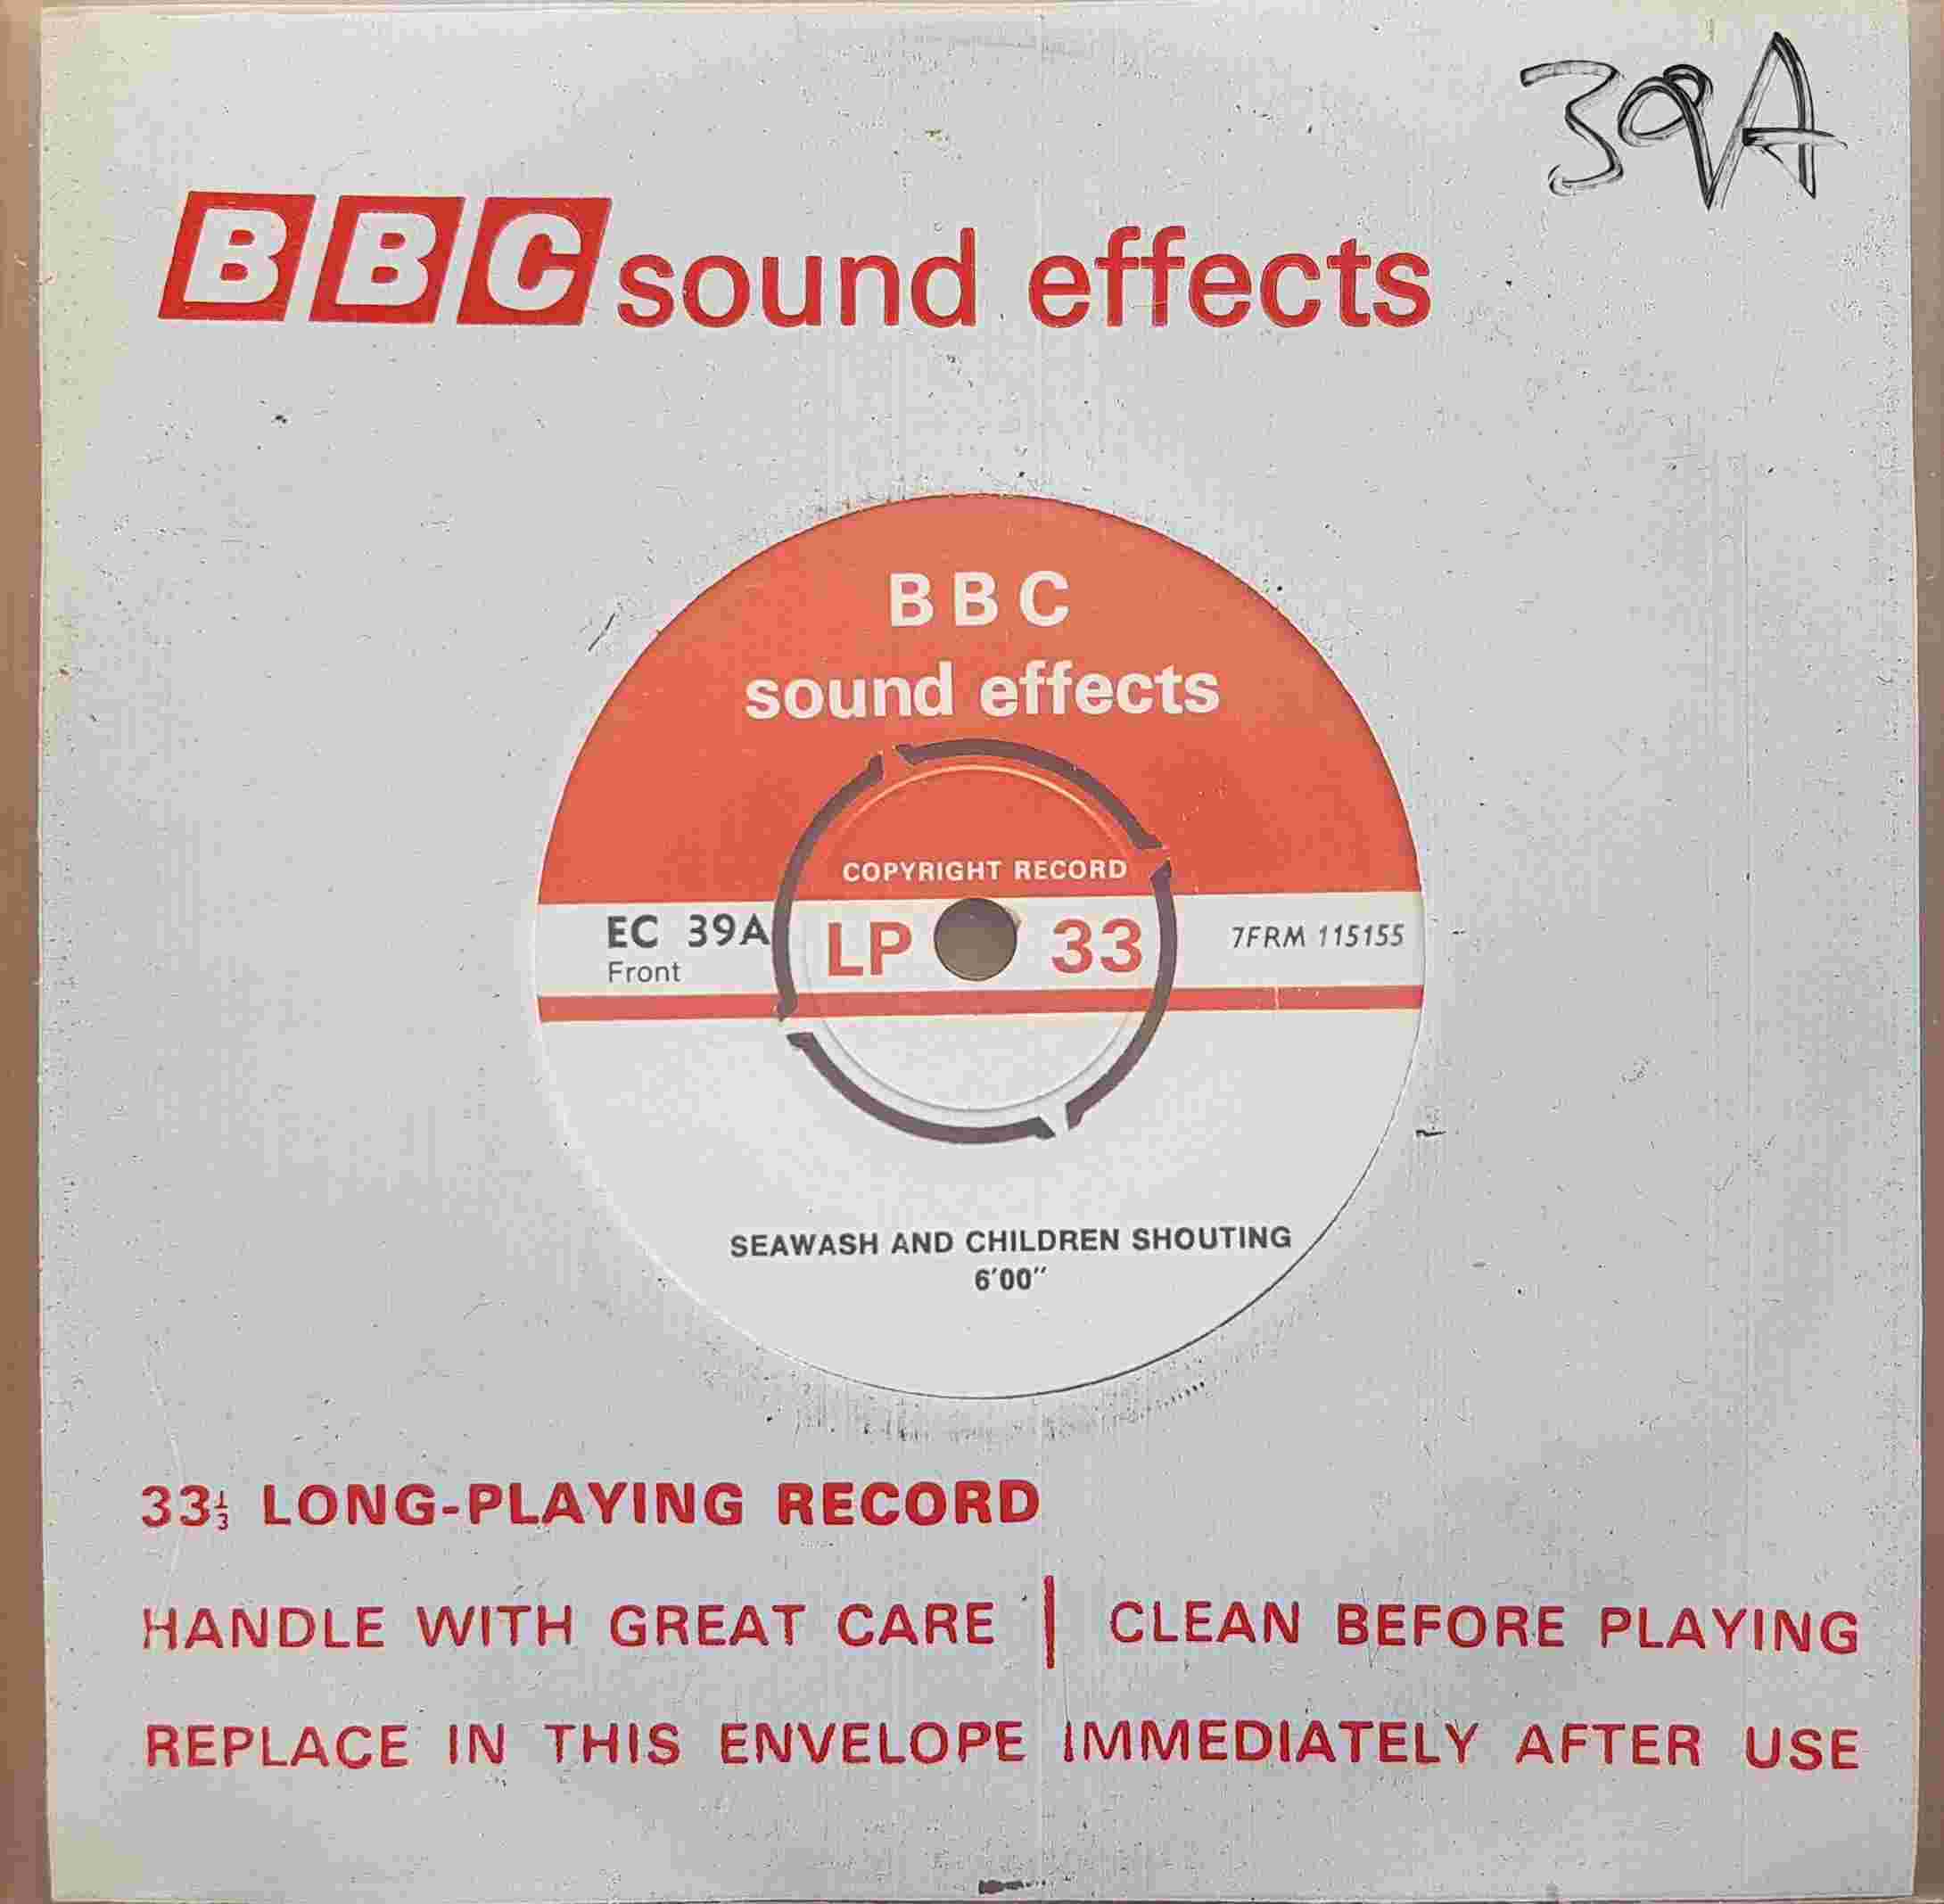 Picture of EC 39A Seawash by artist Not registered from the BBC singles - Records and Tapes library